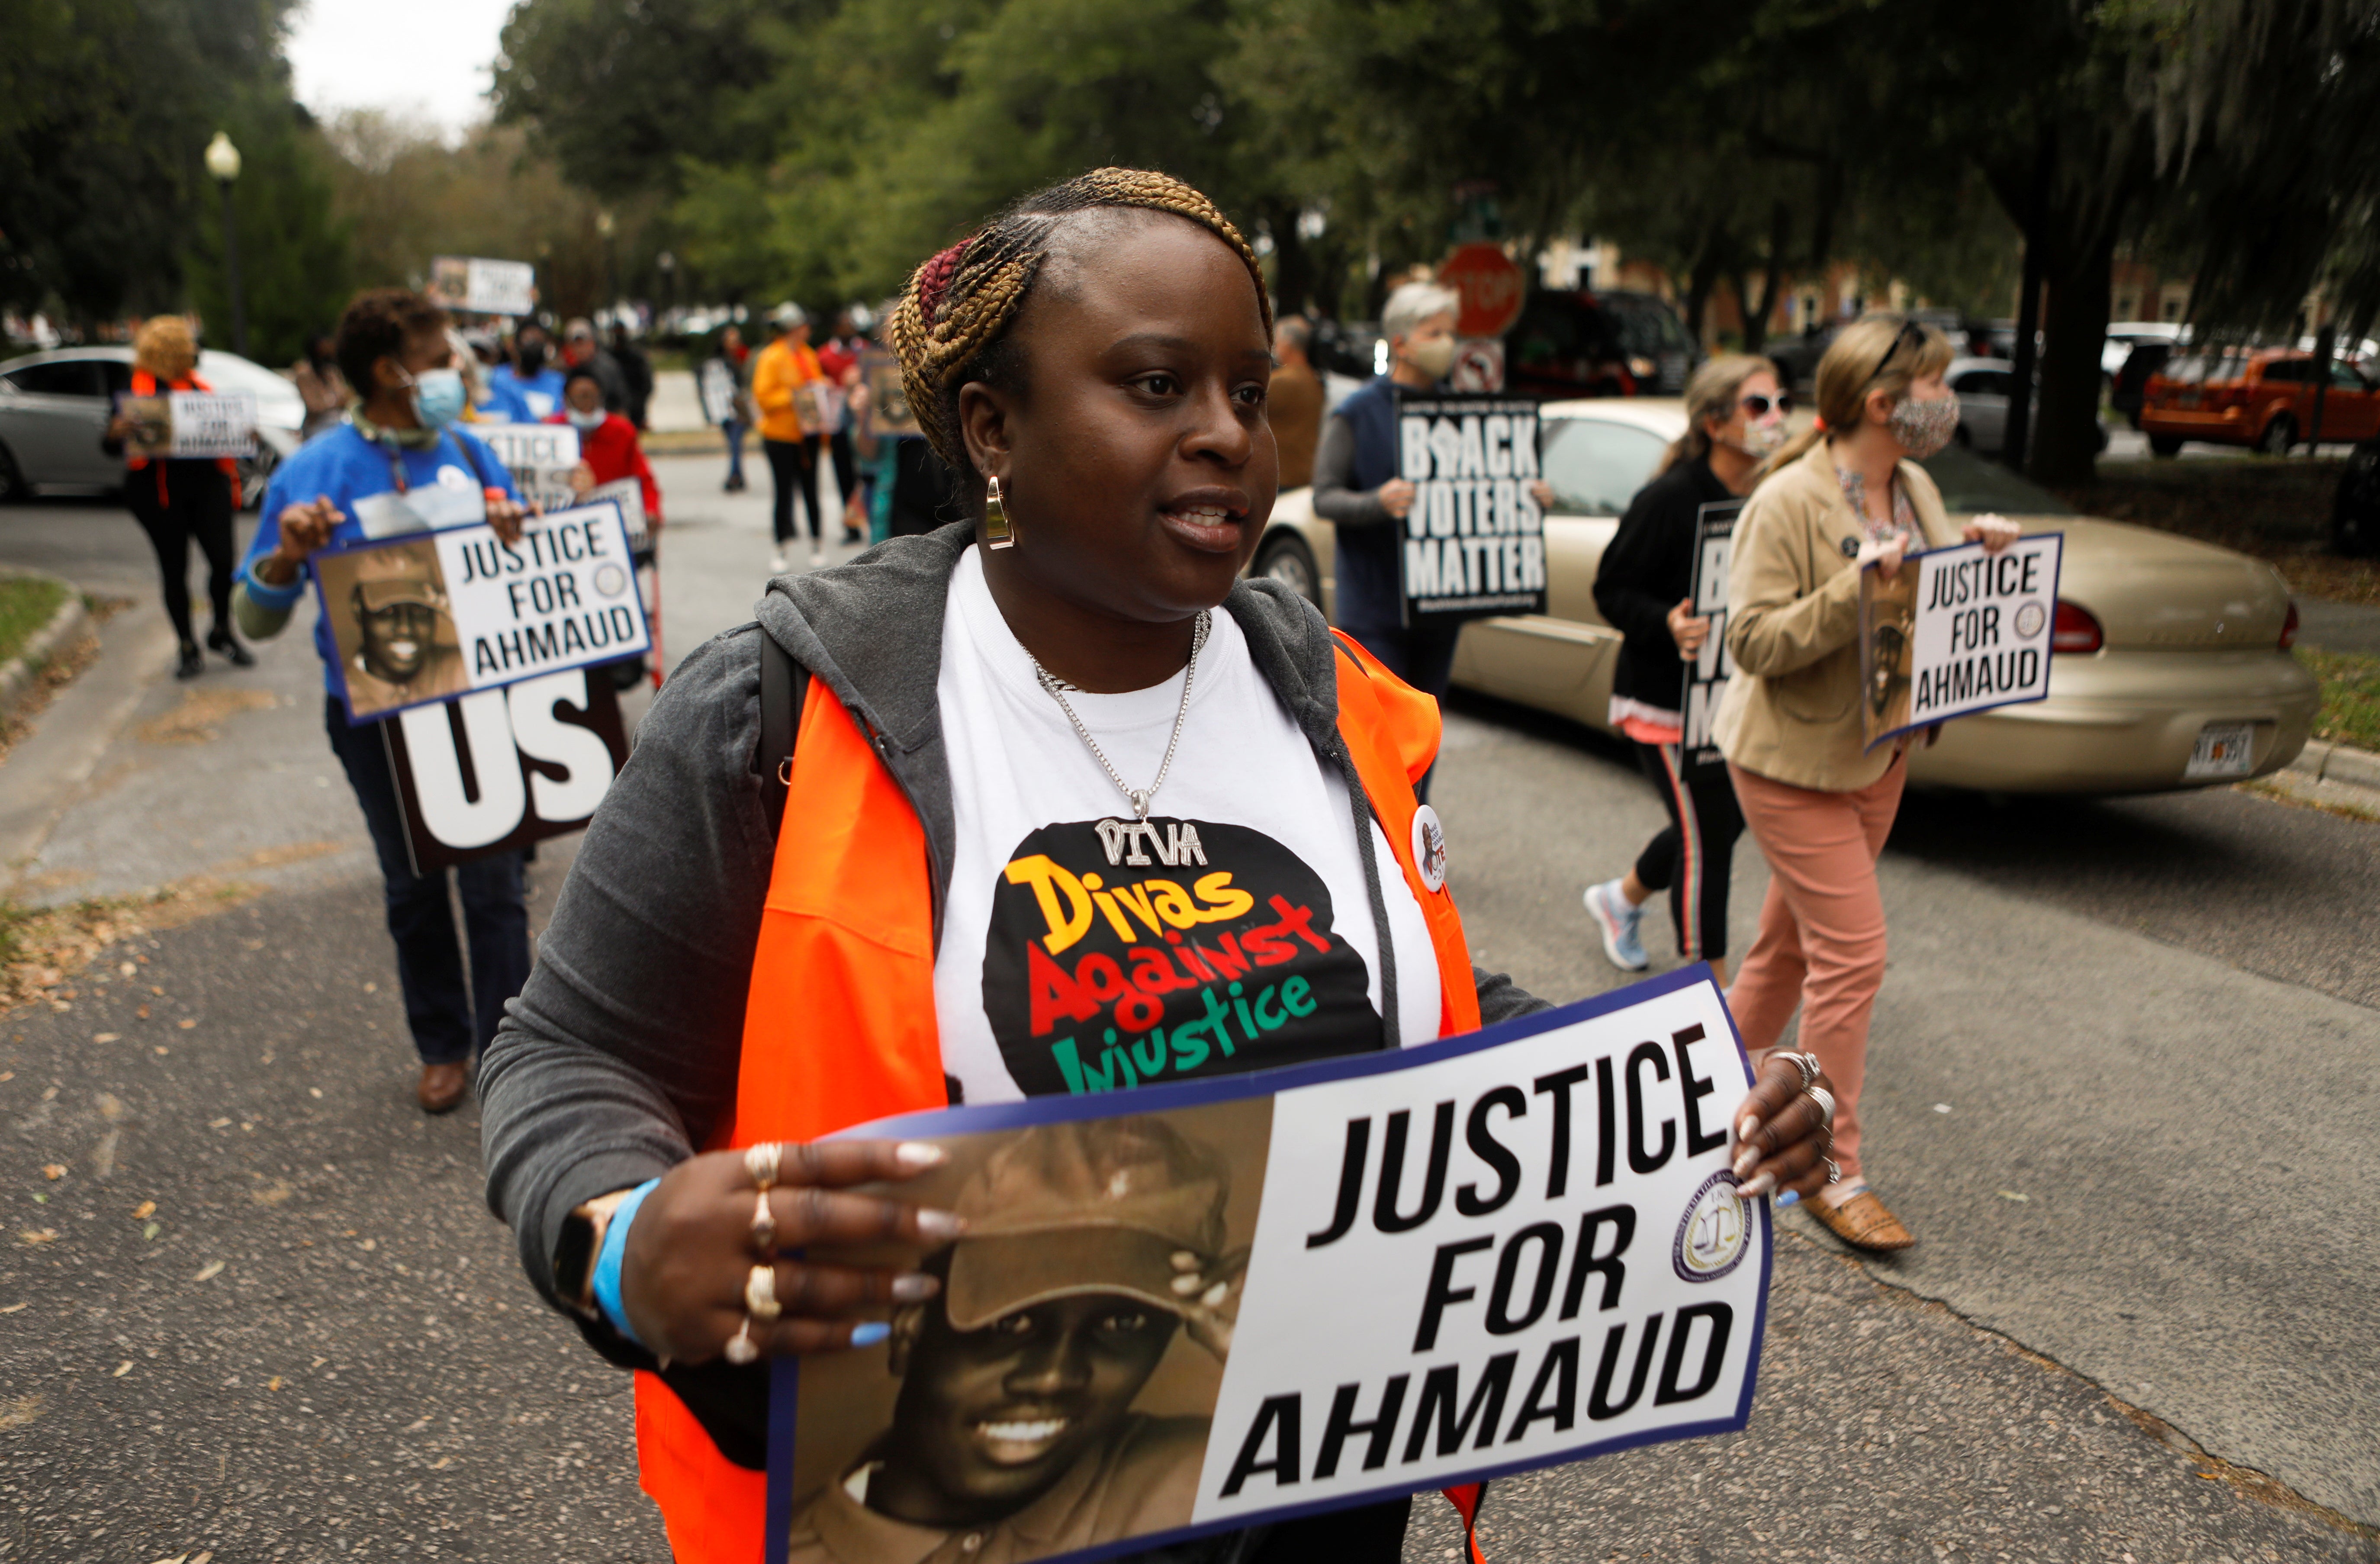 Protesters carry “Justice for Ahmaud” signs through Brunswick, Georgia, on 4 November